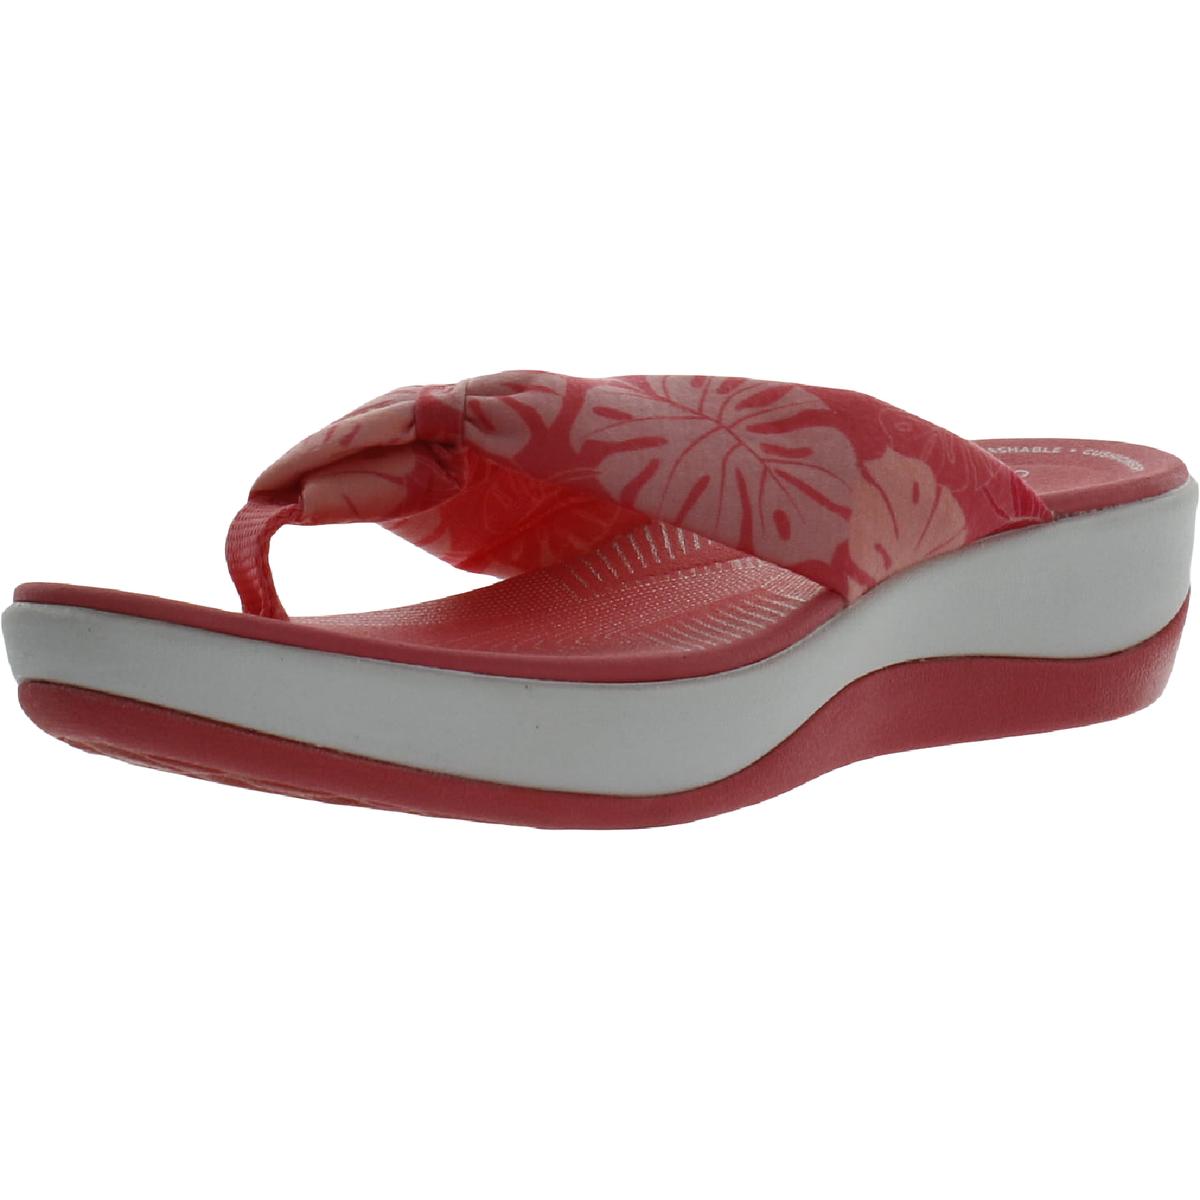 Cloudsteppers by Clarks Arla Glison Womens Printed Flip Flop Thong Sandals